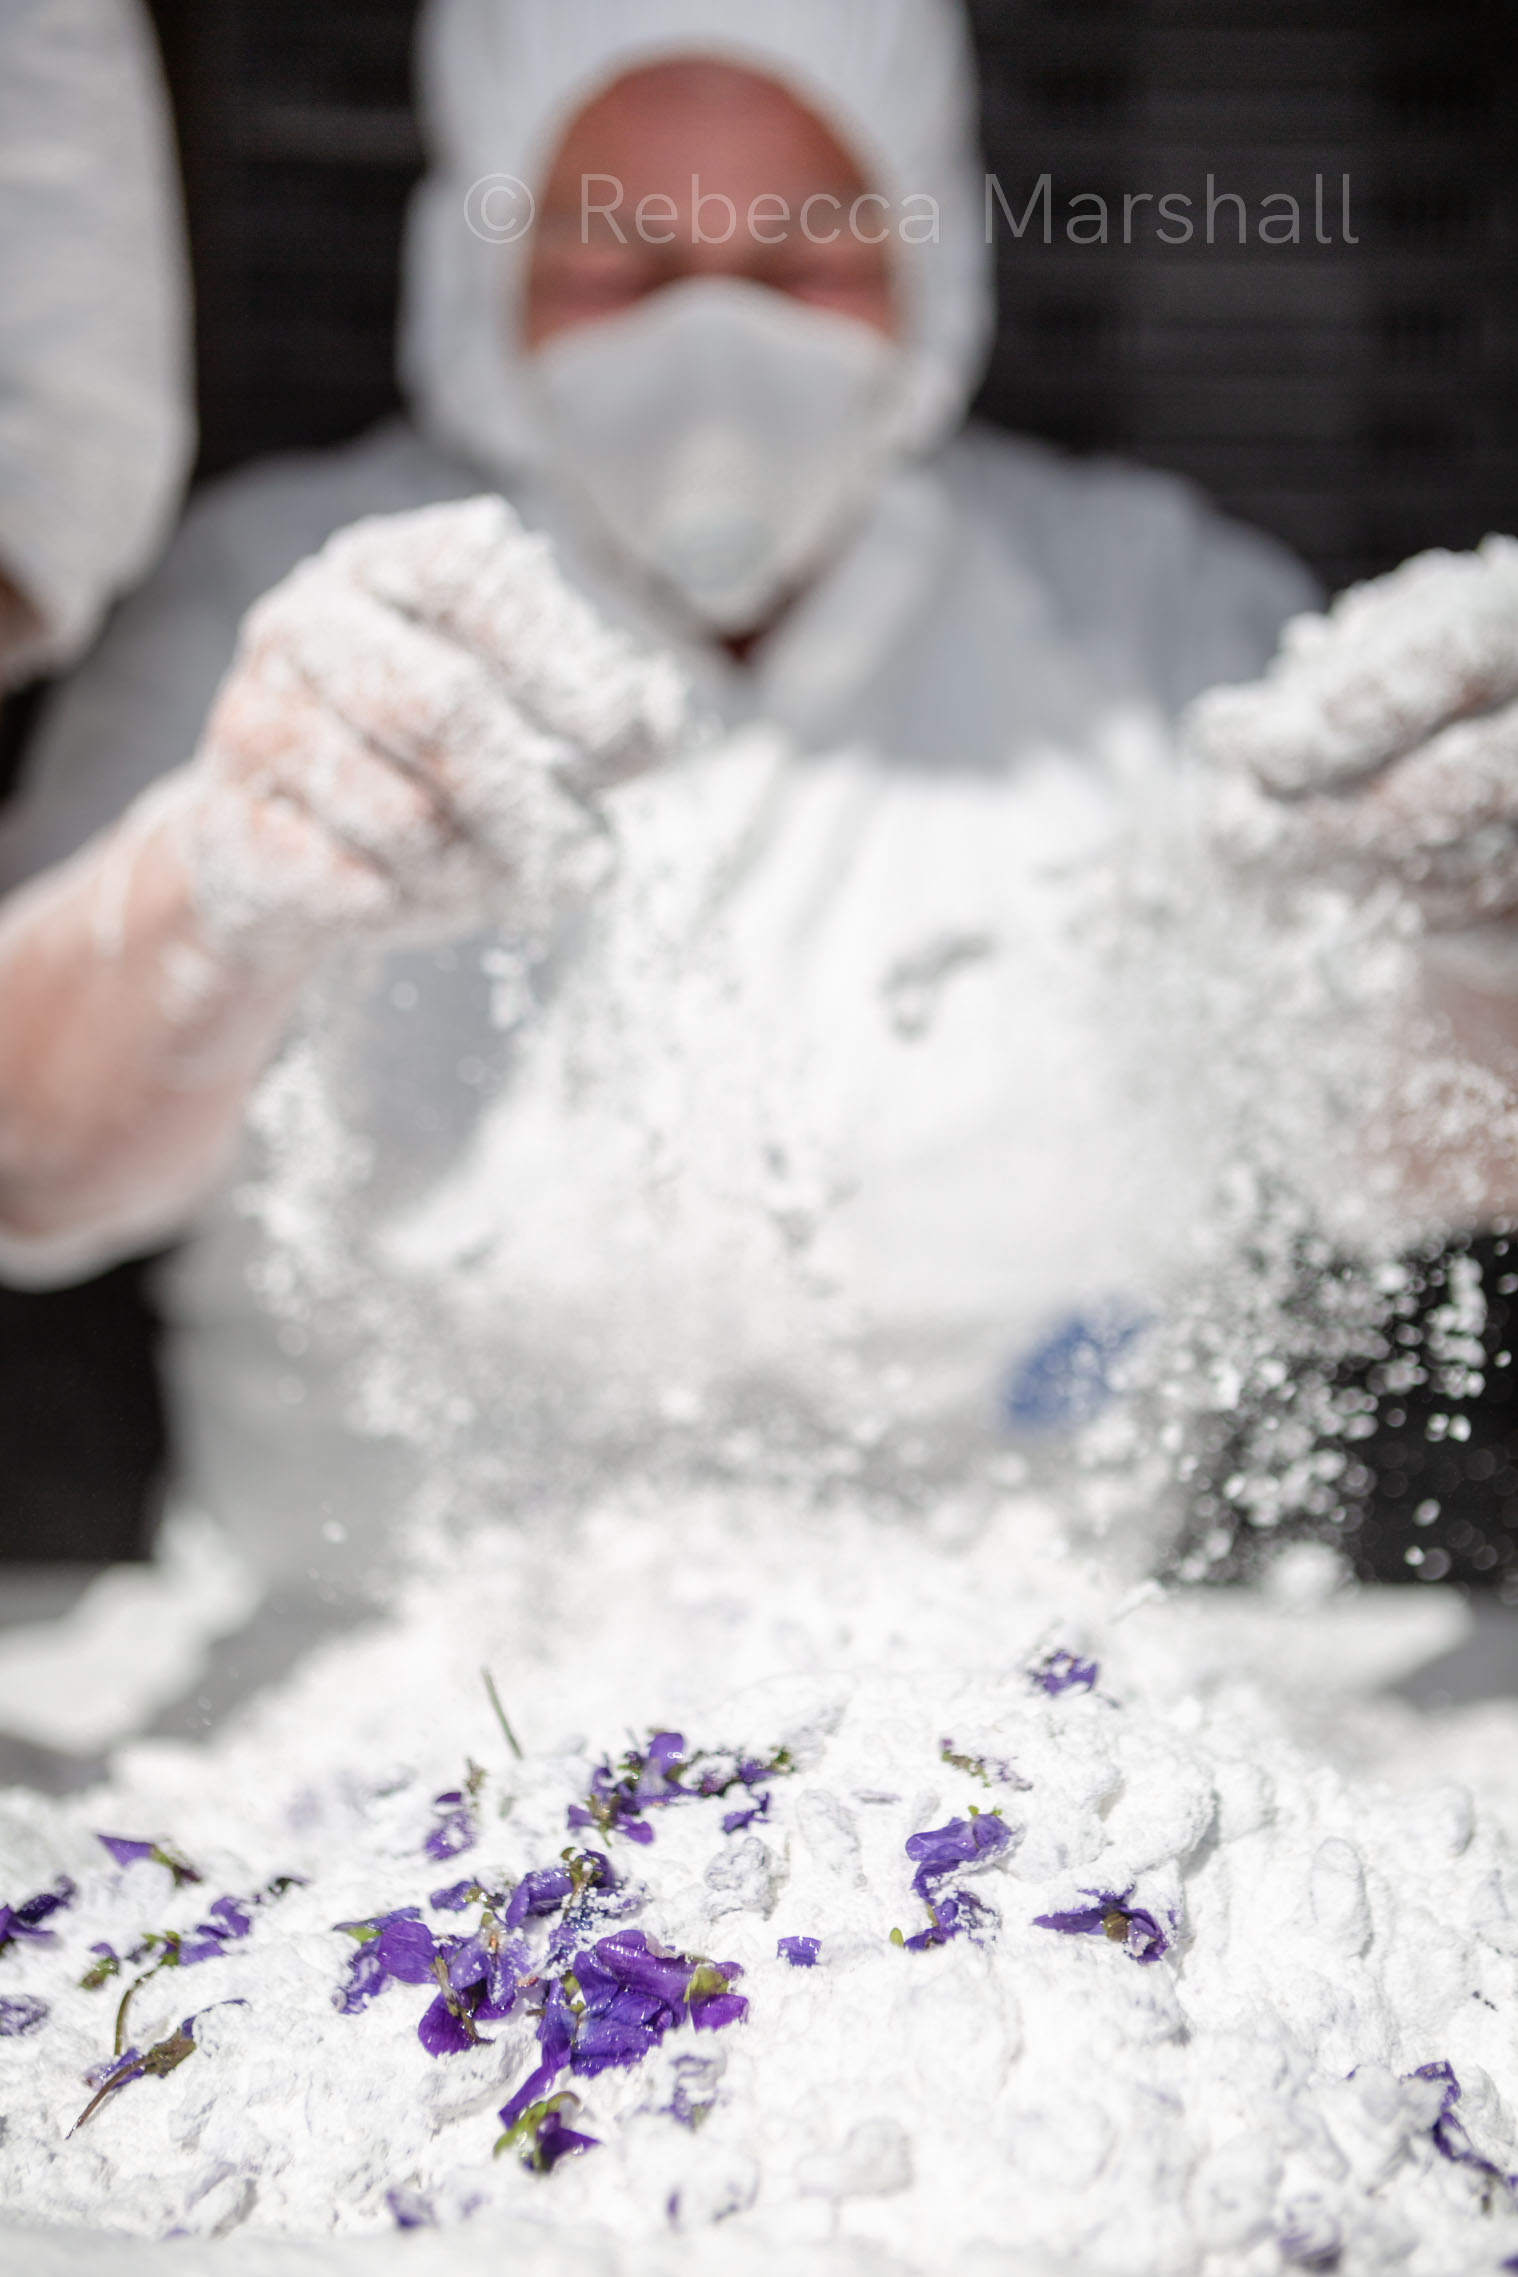 Woman in protective clothing pours icing sugar over violet petals